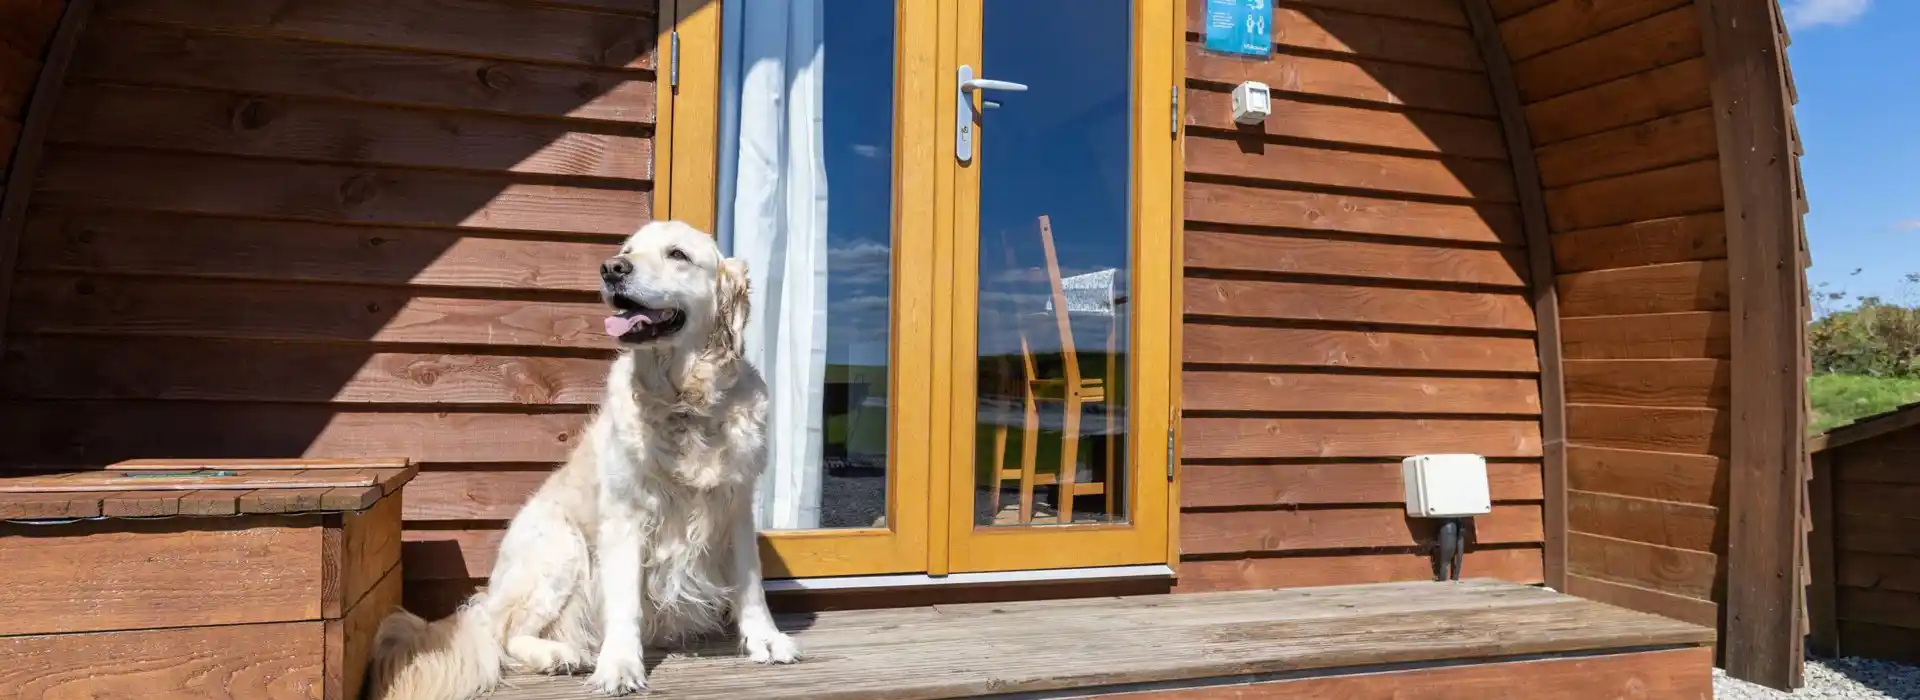 Dog friendly camping pods in Scotland